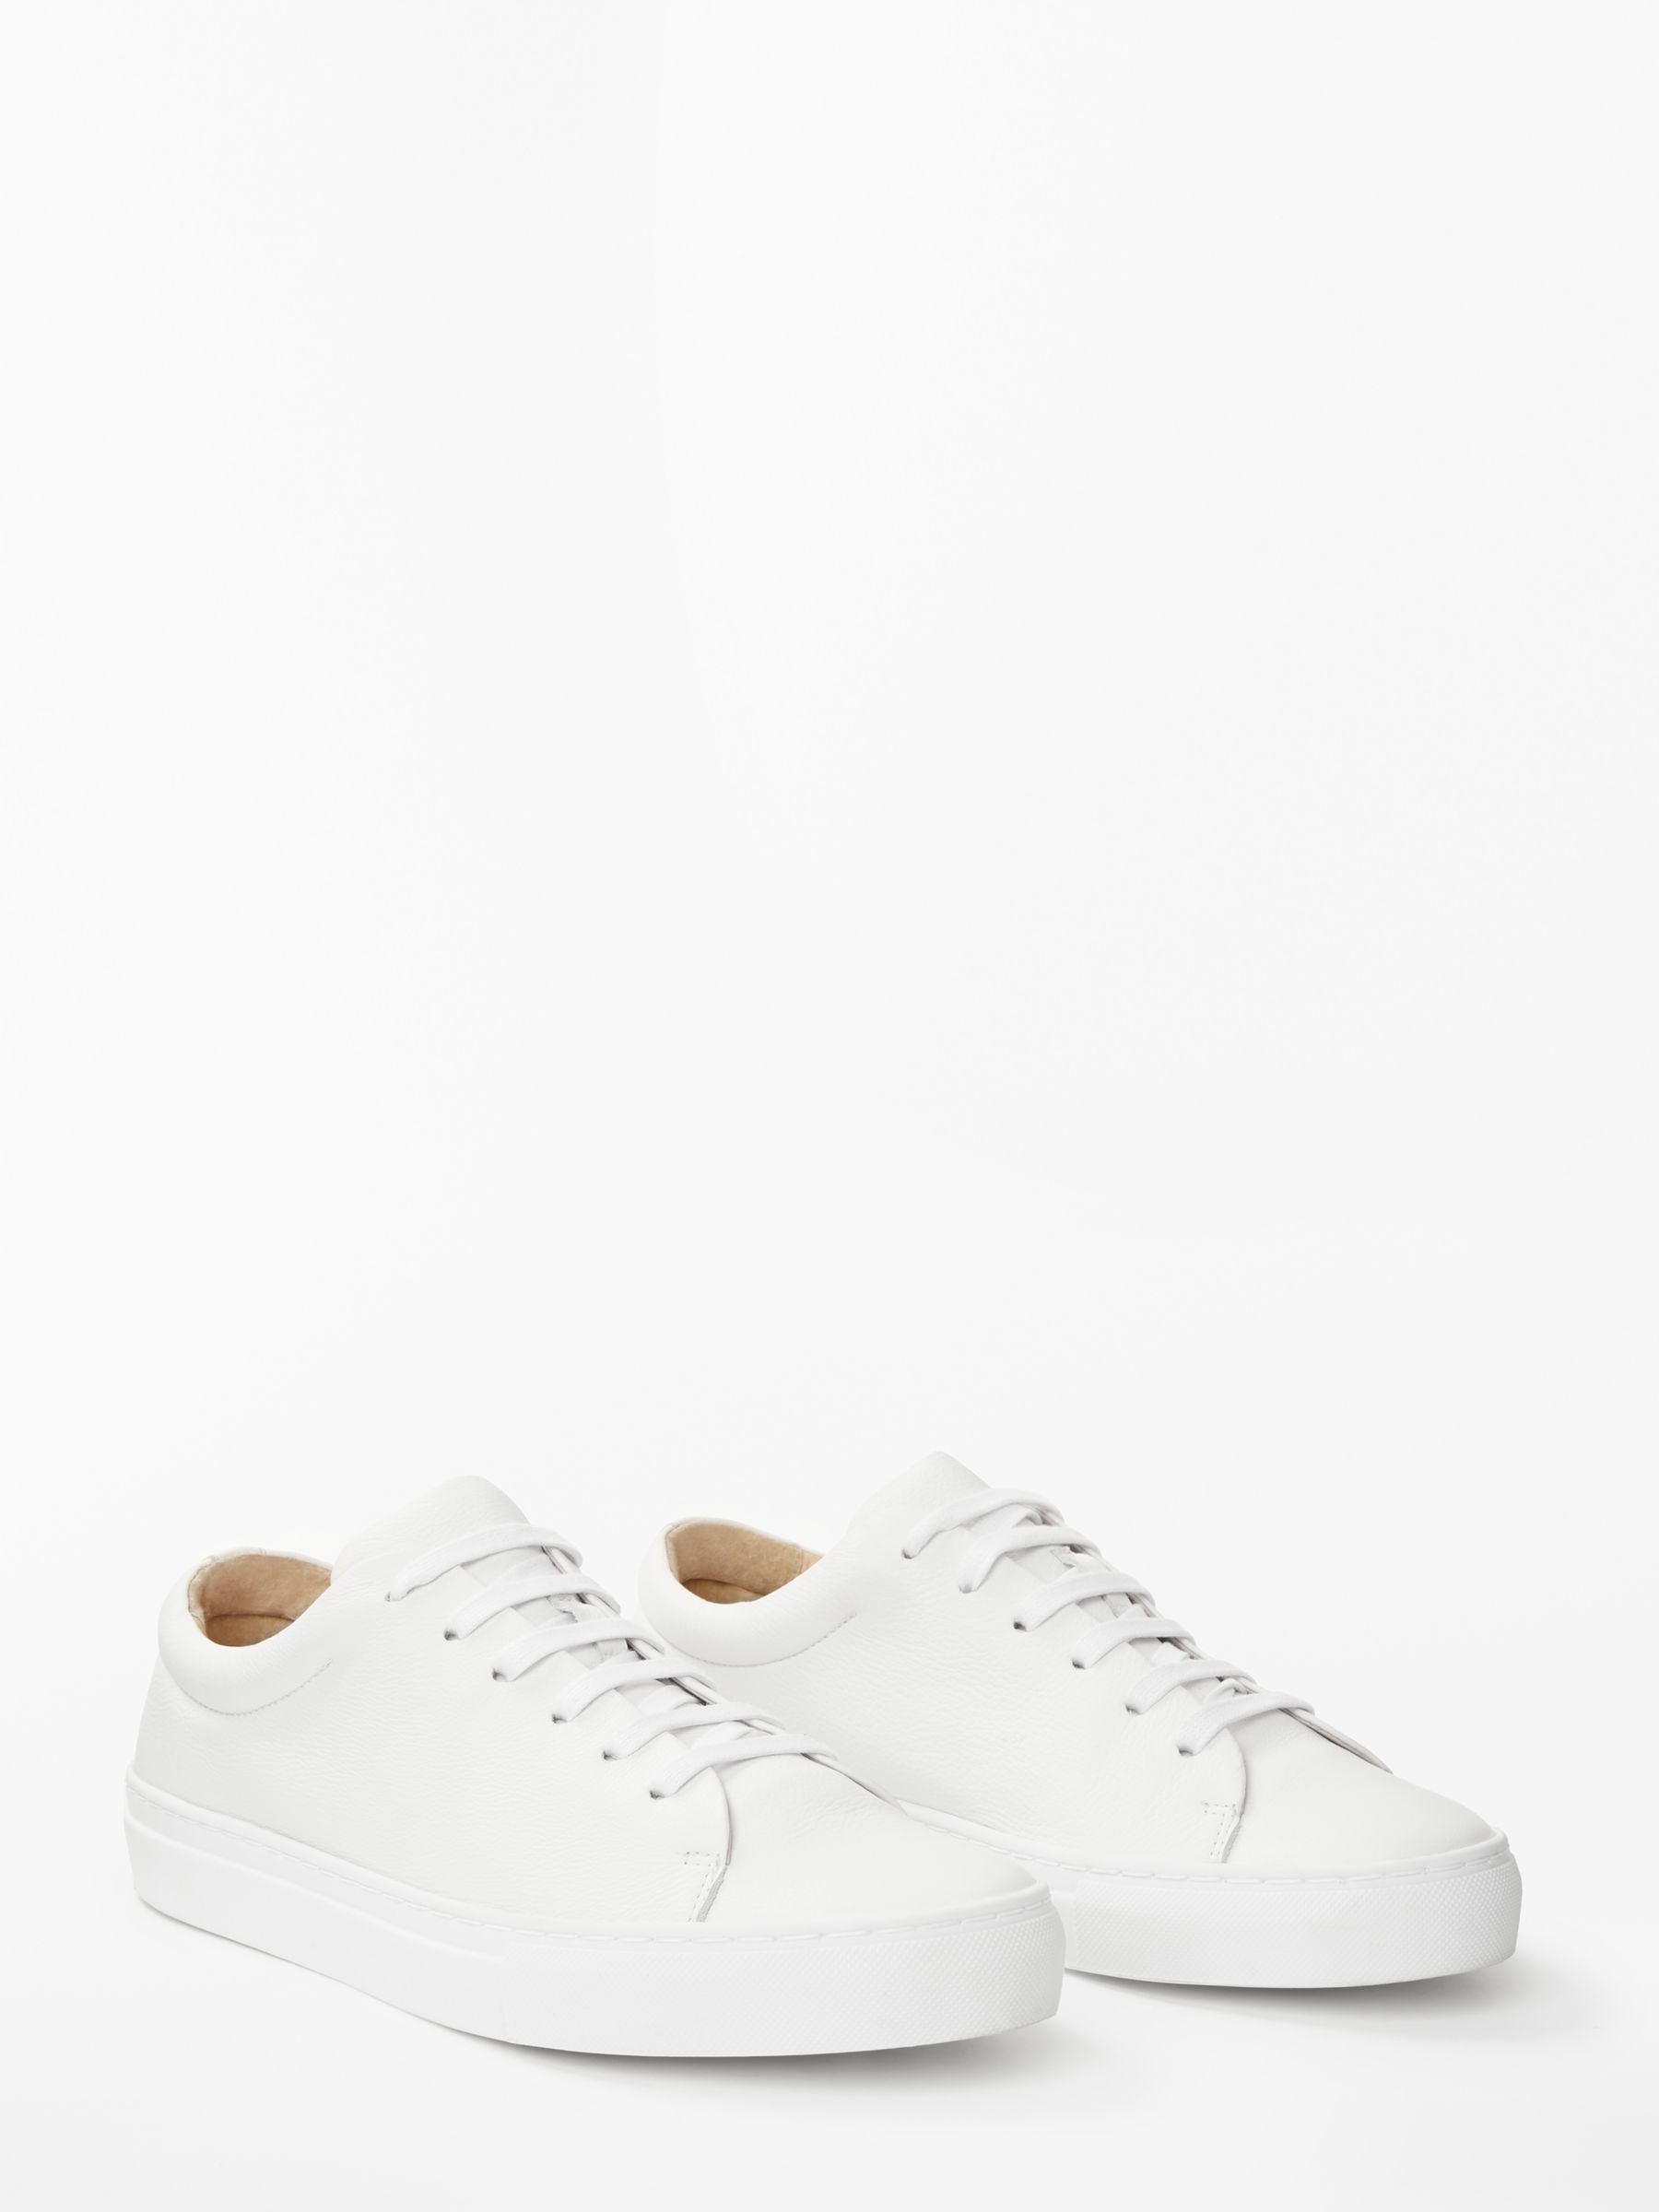 John Lewis Flora Lace Up Trainers, White Leather, 4